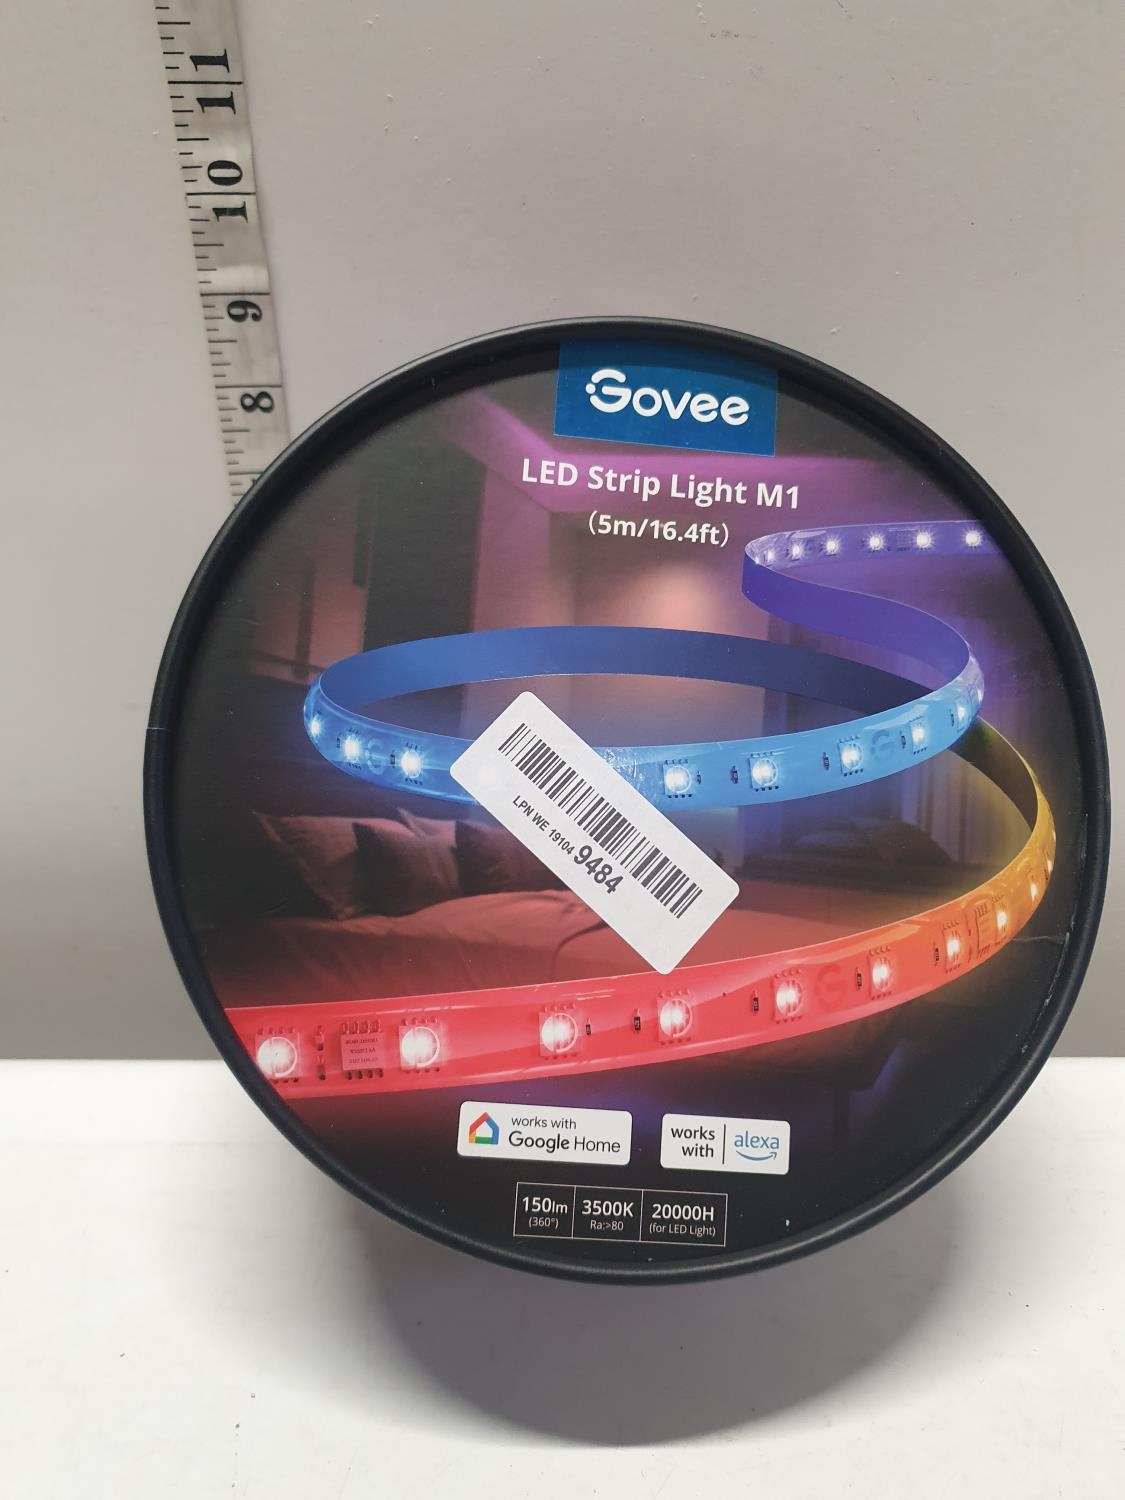 A boxed Gove LED light strip (untested)